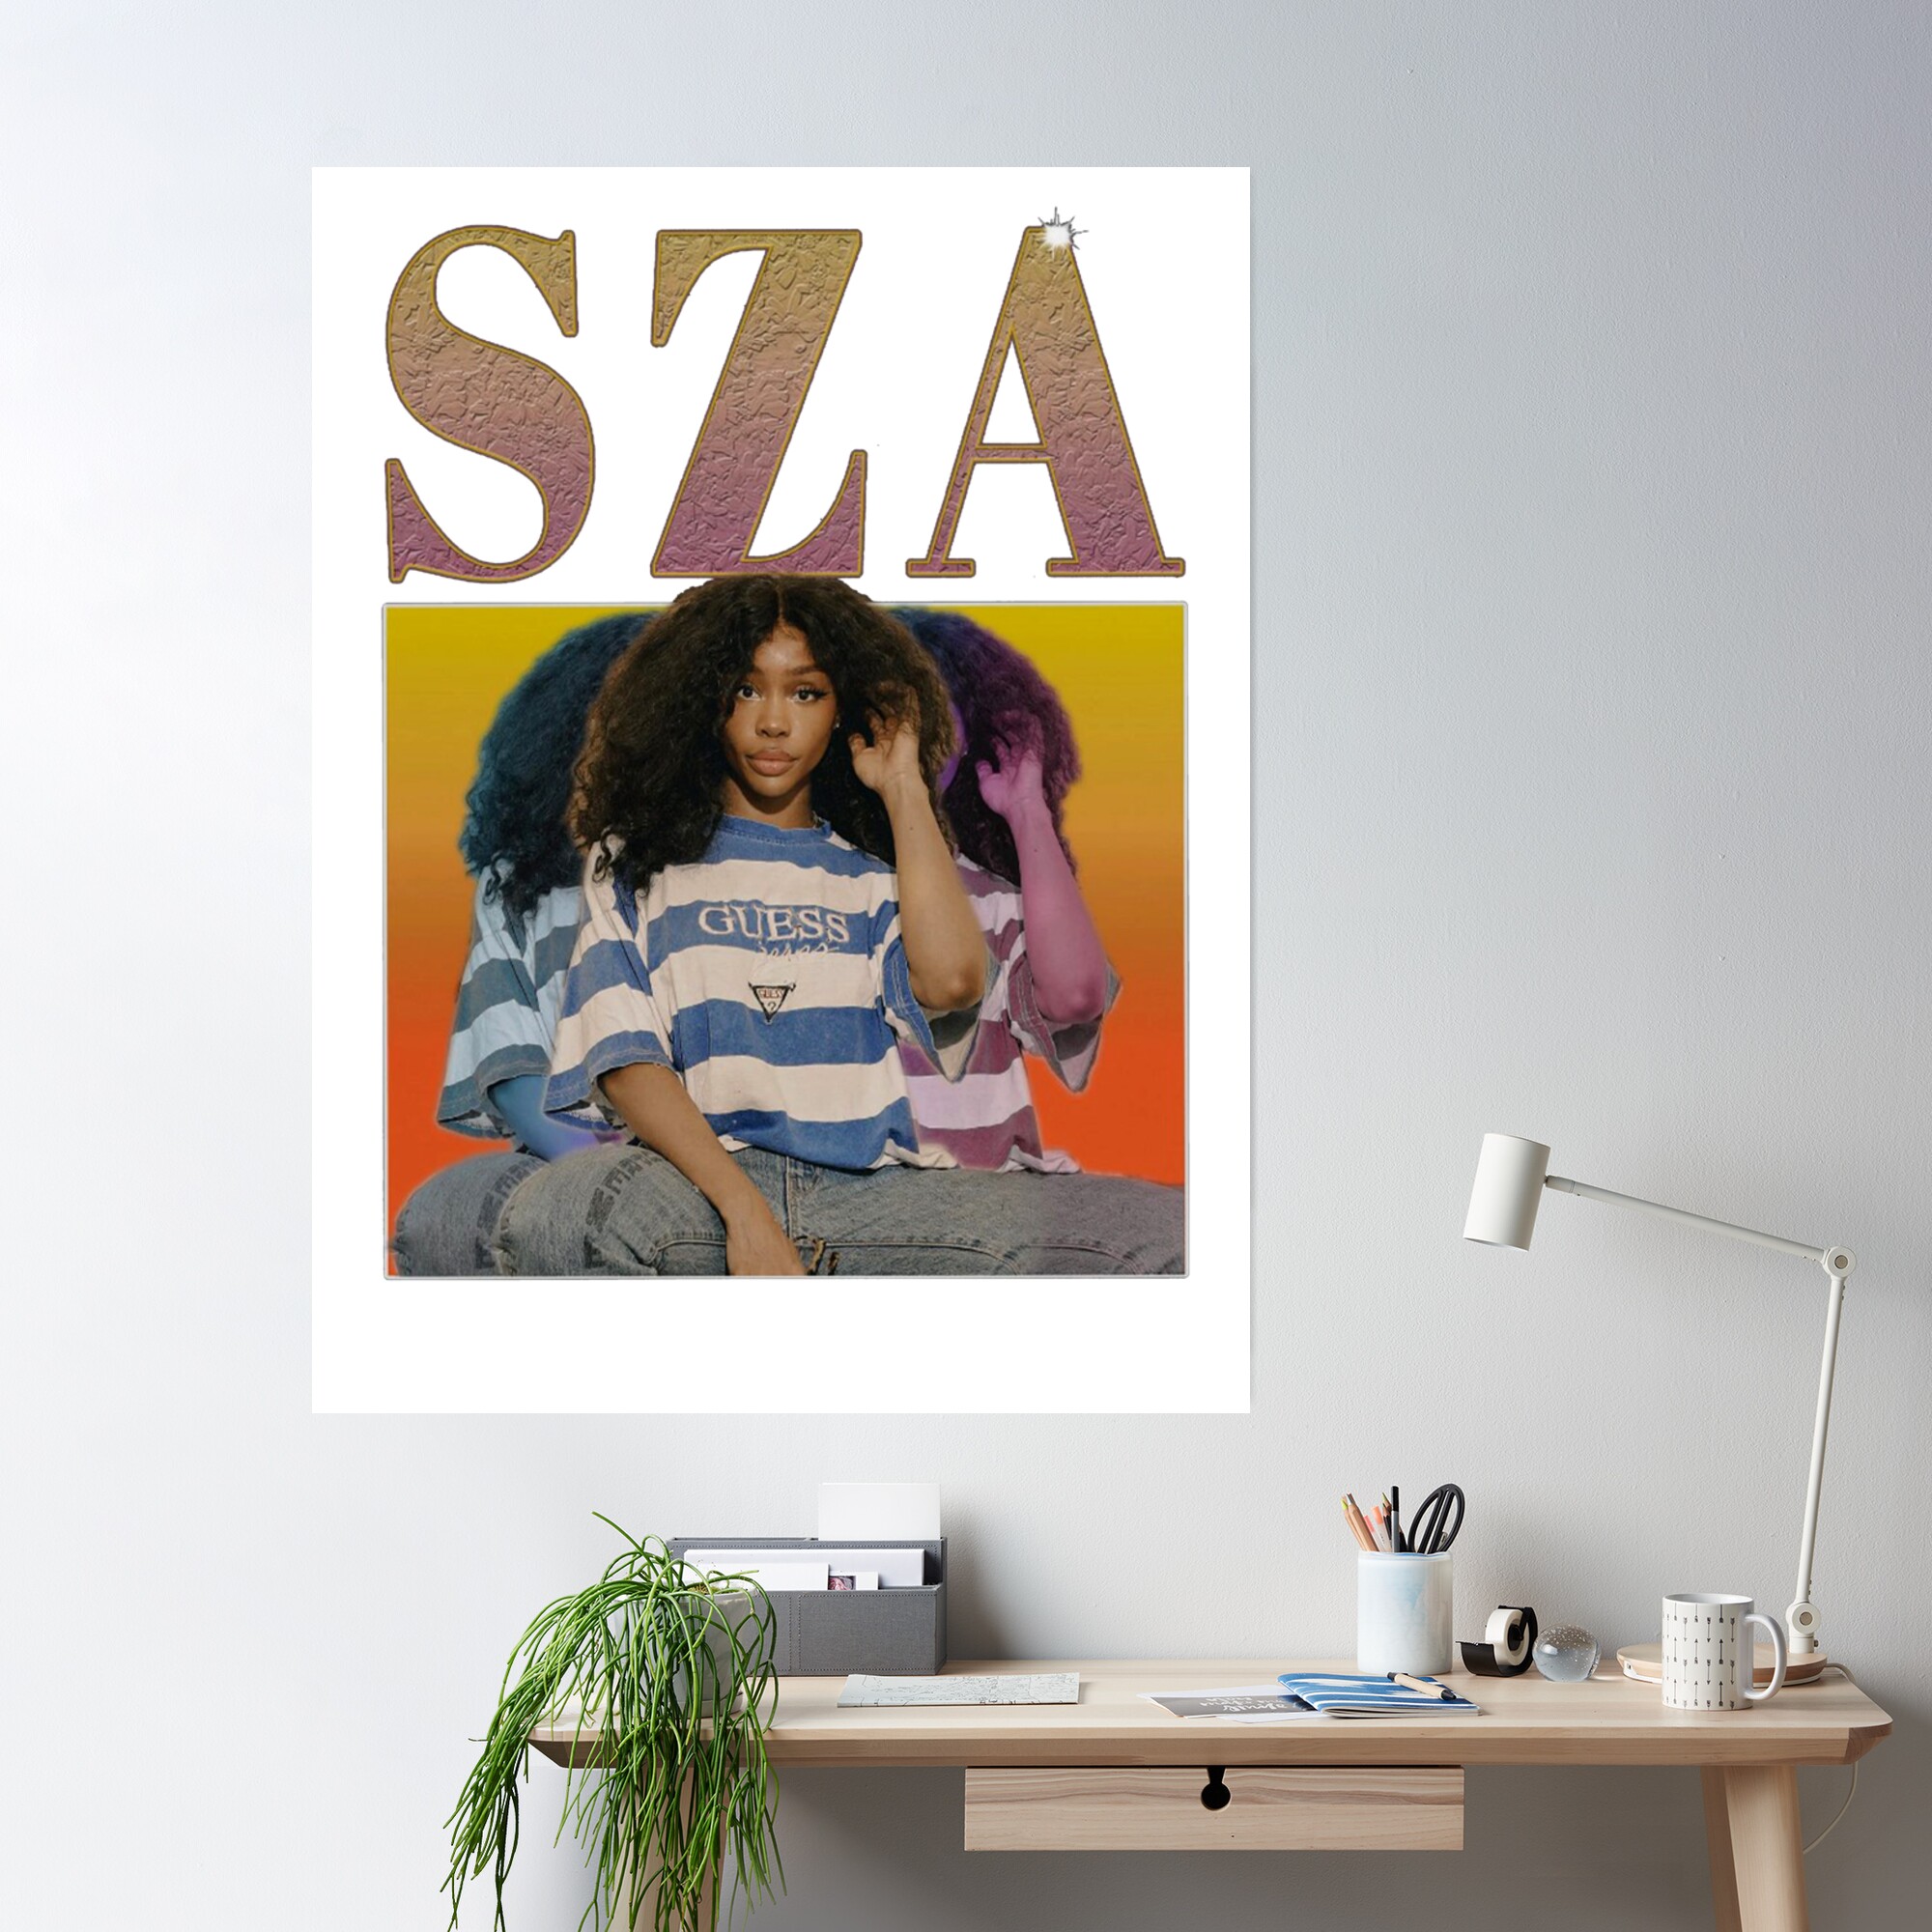 cposterlargesquare product2000x2000 10 - SZA Shop